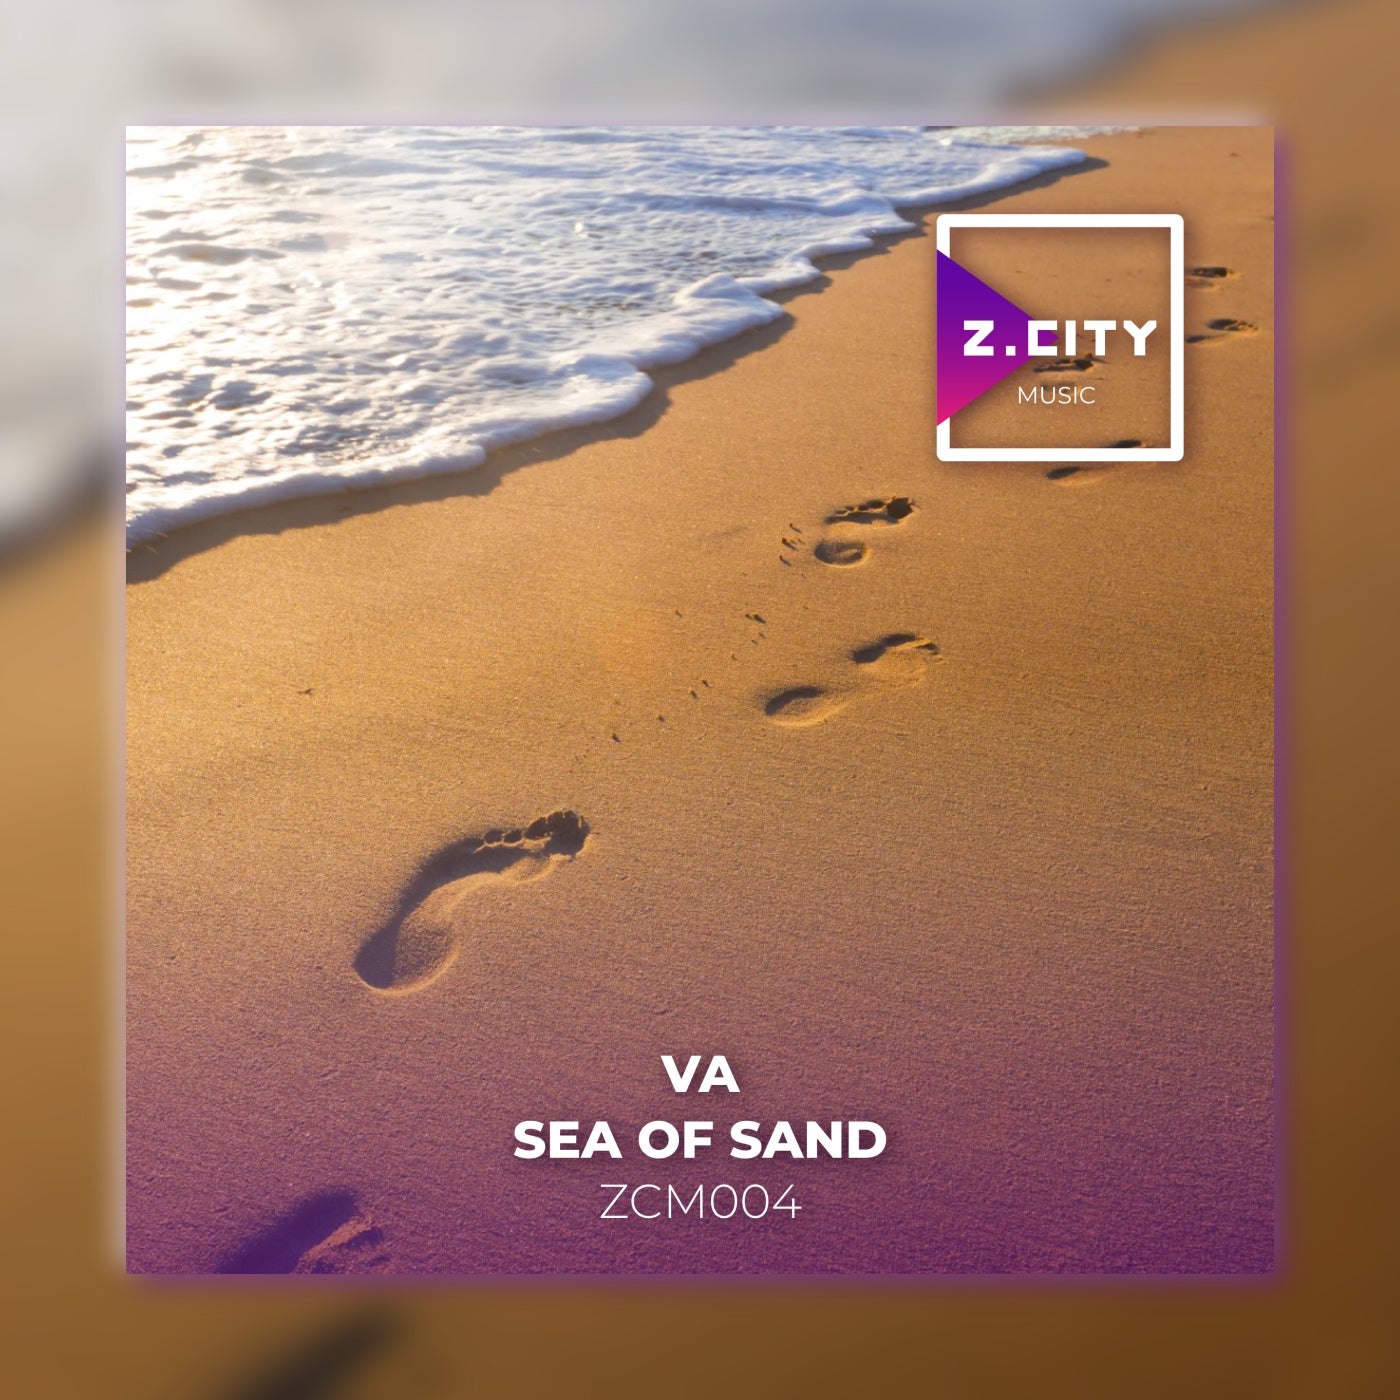 Sea of Sand from Z.CITY Music on Beatport